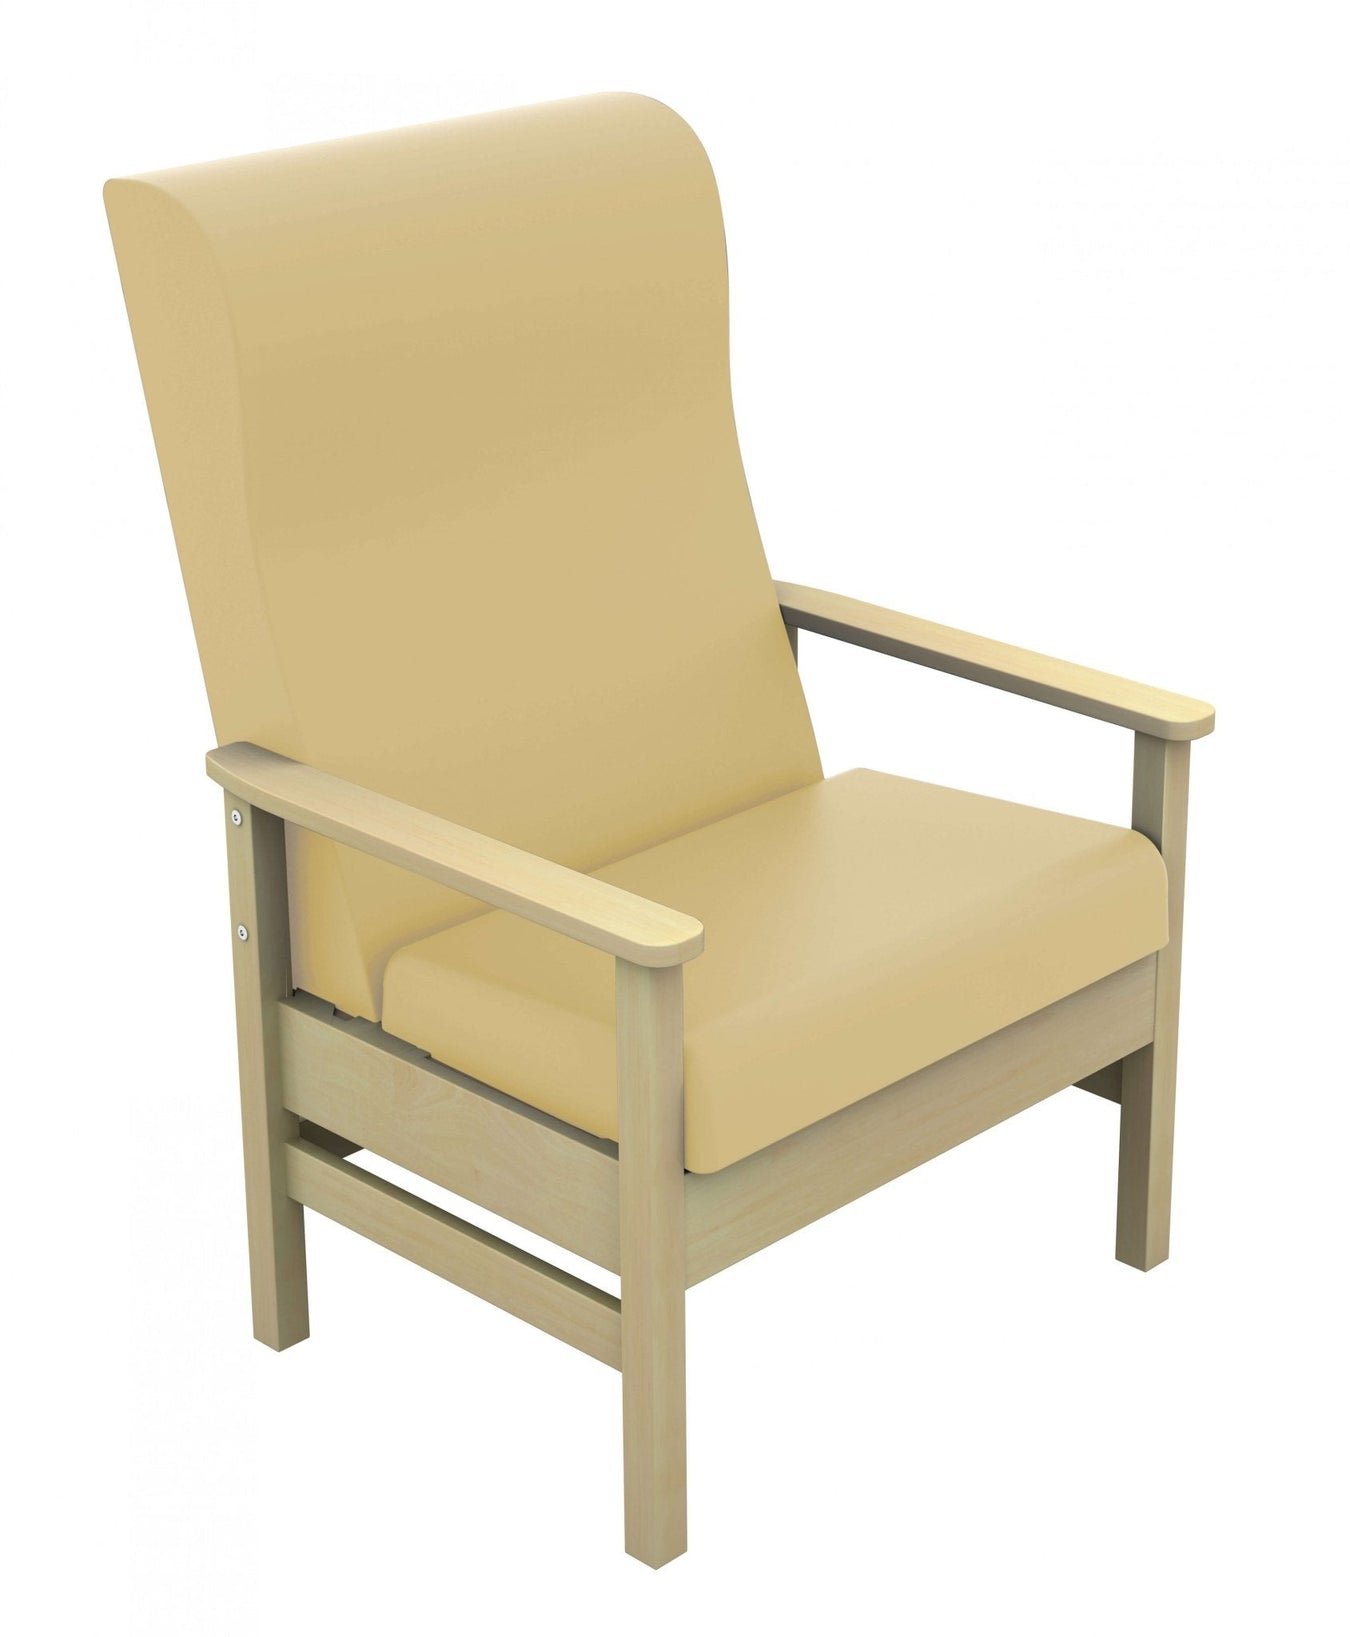 bariatric chairs | Medscope